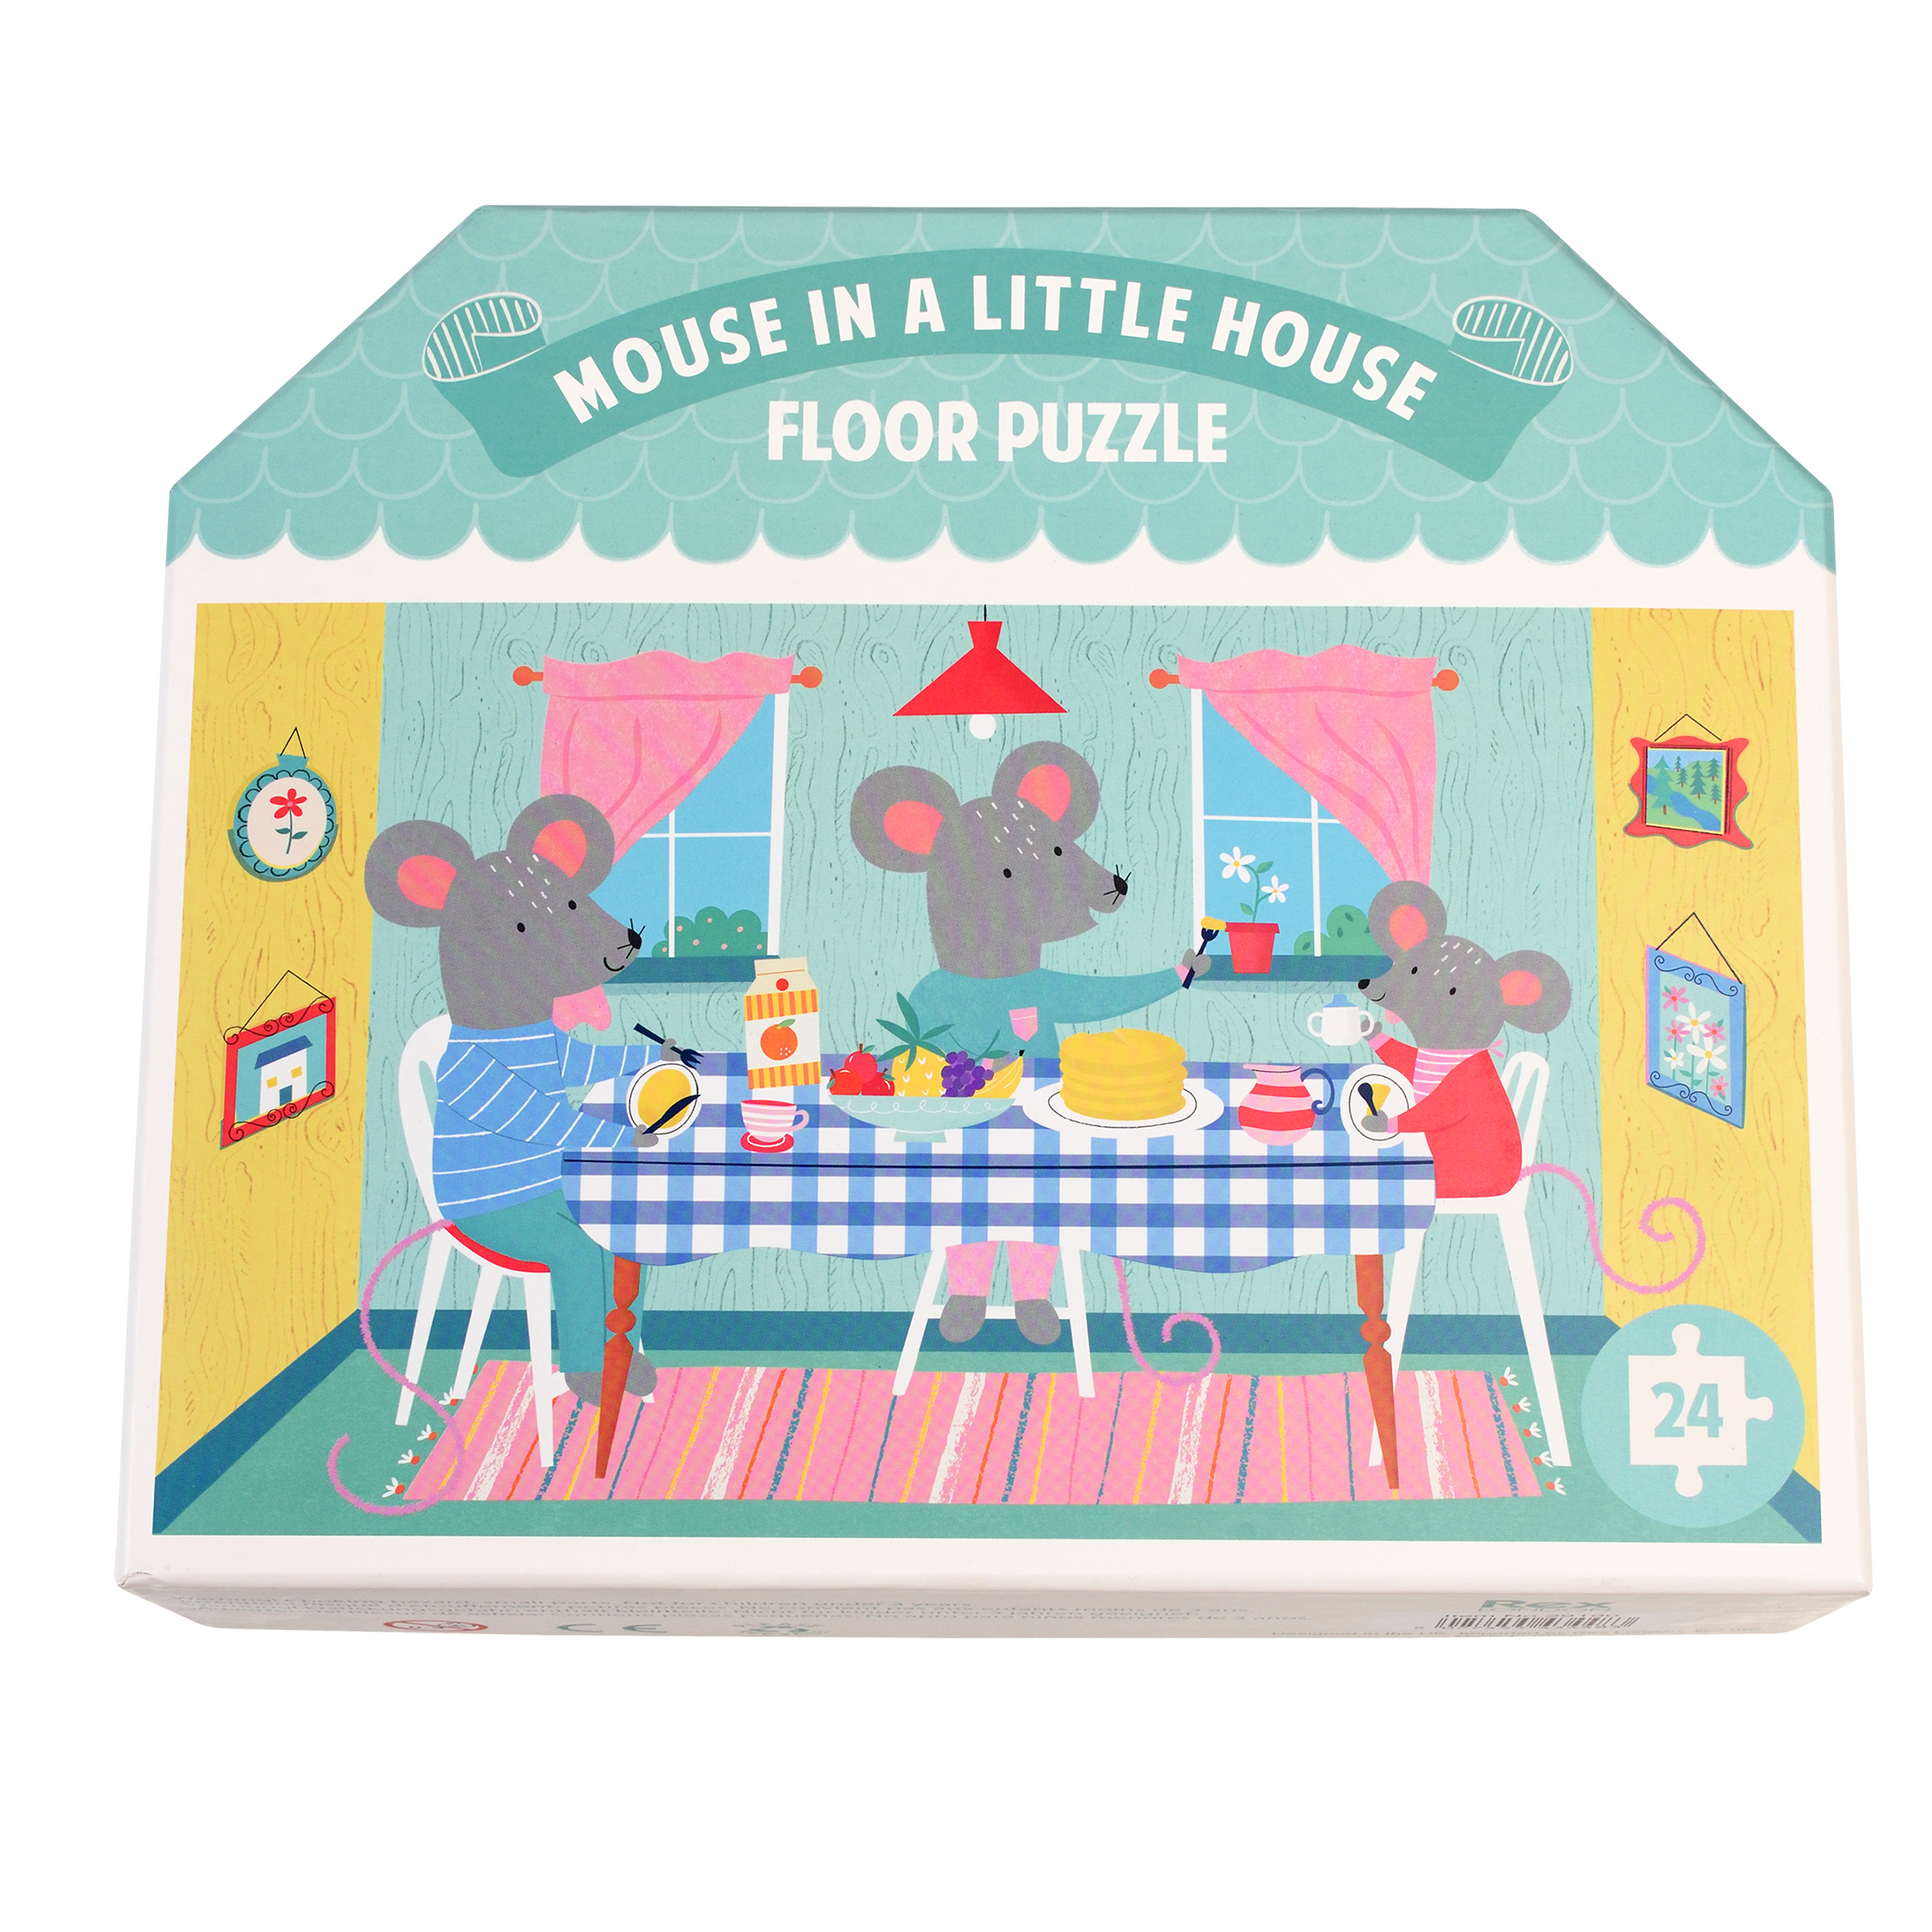 29190_1-mouse-house-floor-puzzle